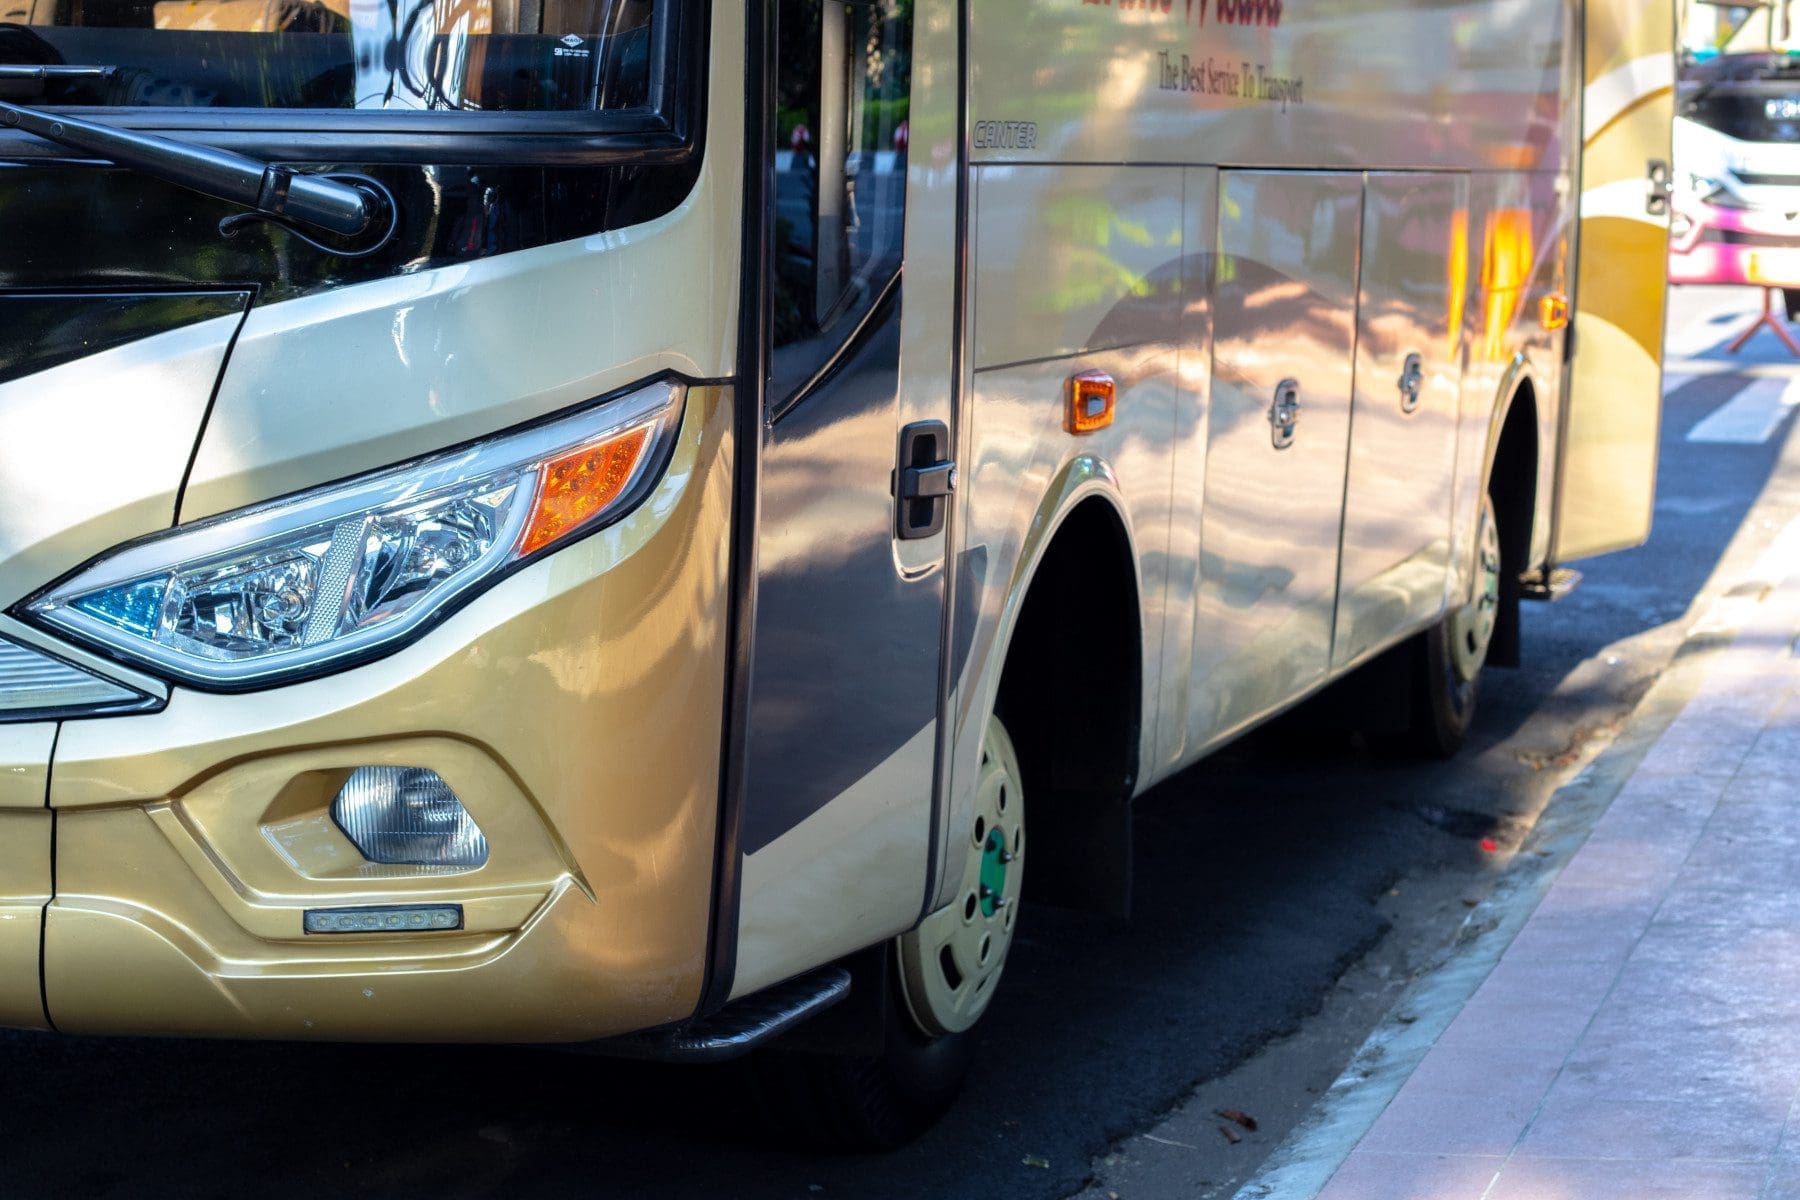 Why Is Bus Rental the Best Option for Many Cases?